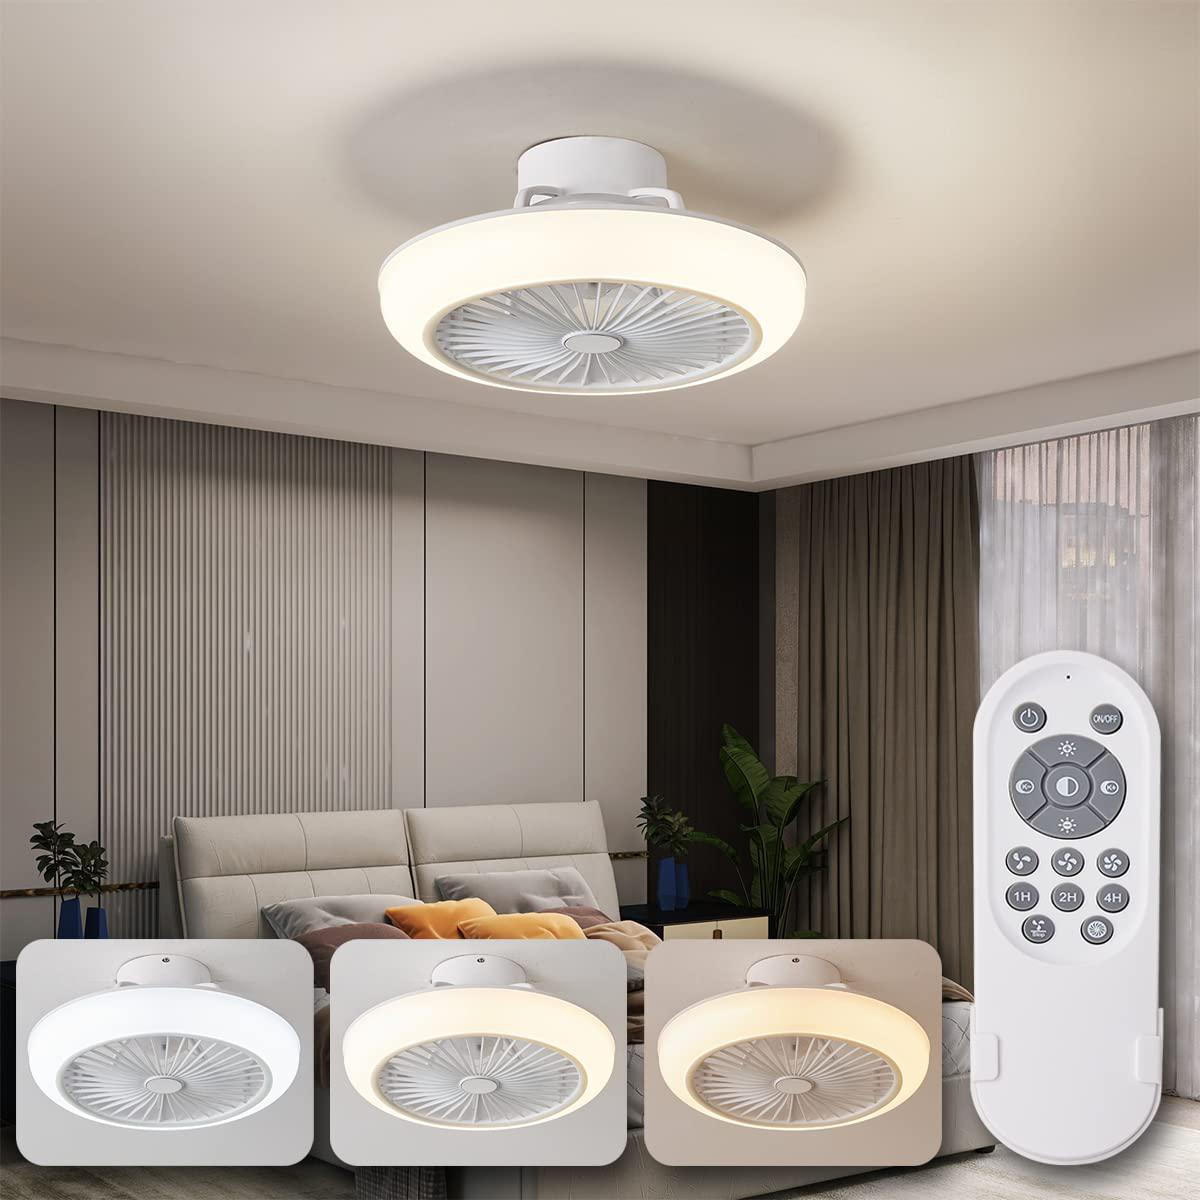 LHLYCLX modern 18'' ceiling fans with lights flush mount, 3 color dimmable led ceiling fan remote control, low profile enclosed ceili